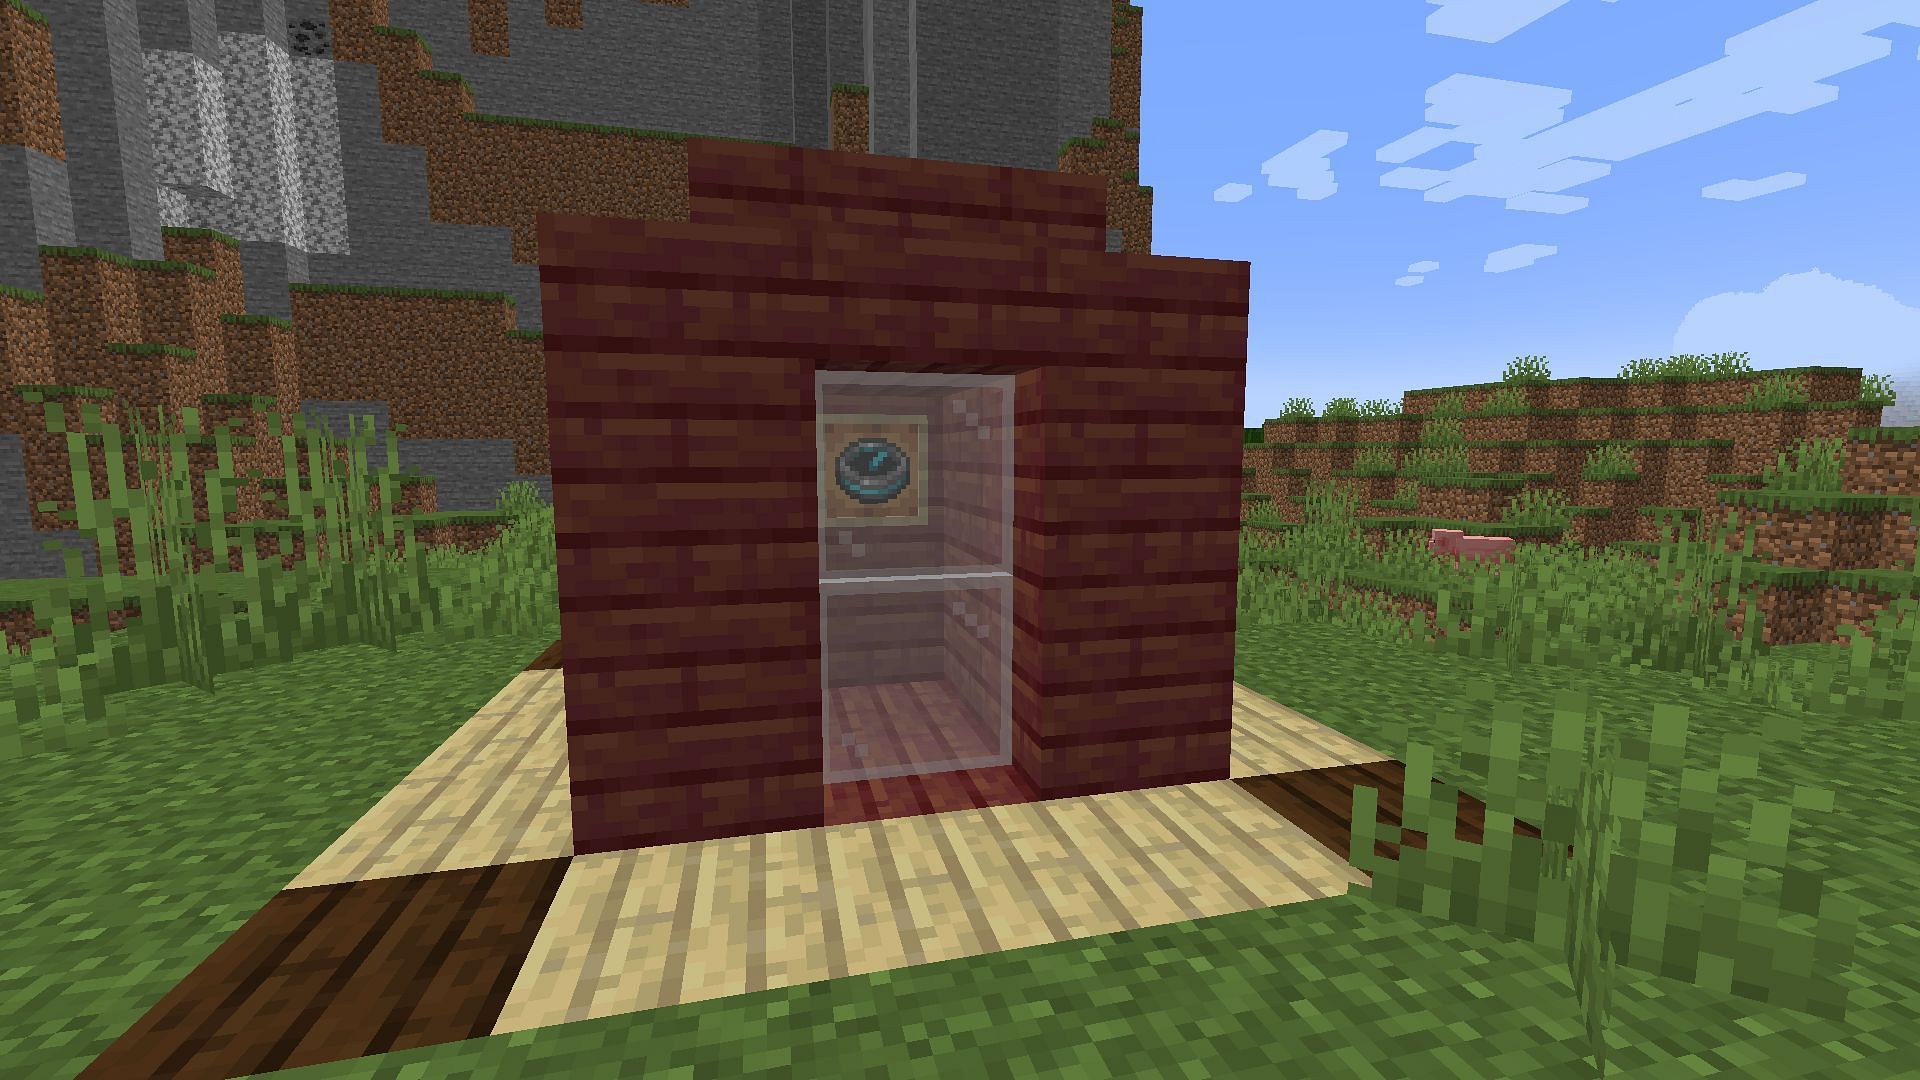 A recovery compass that players can access in case of death (Image via Minecraft)